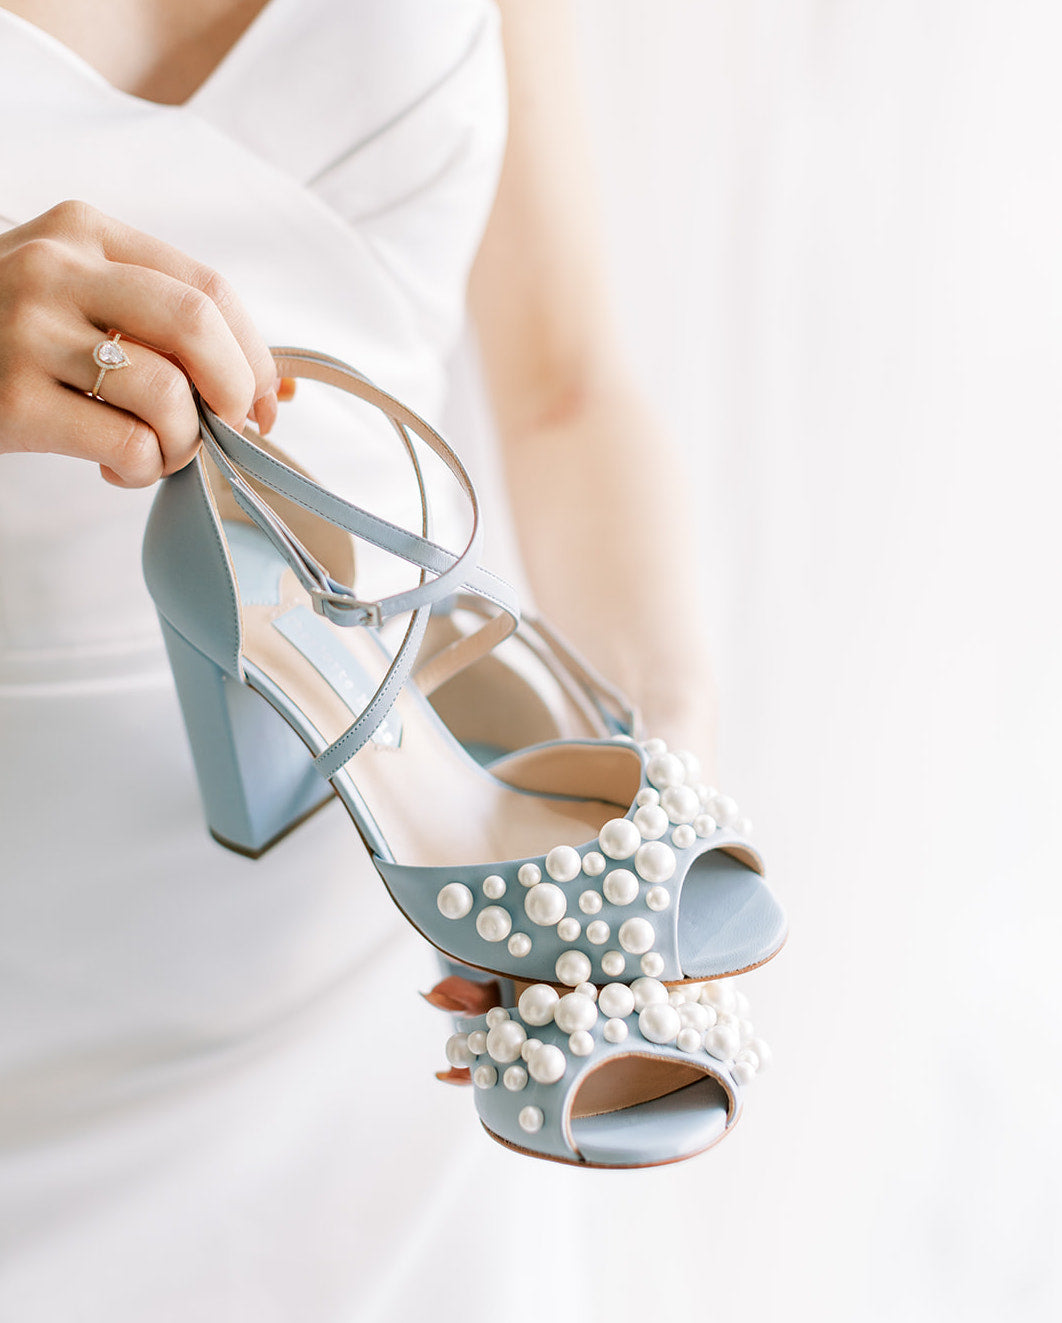 Bluebridalshoes with pearl embellishment charlotte mills